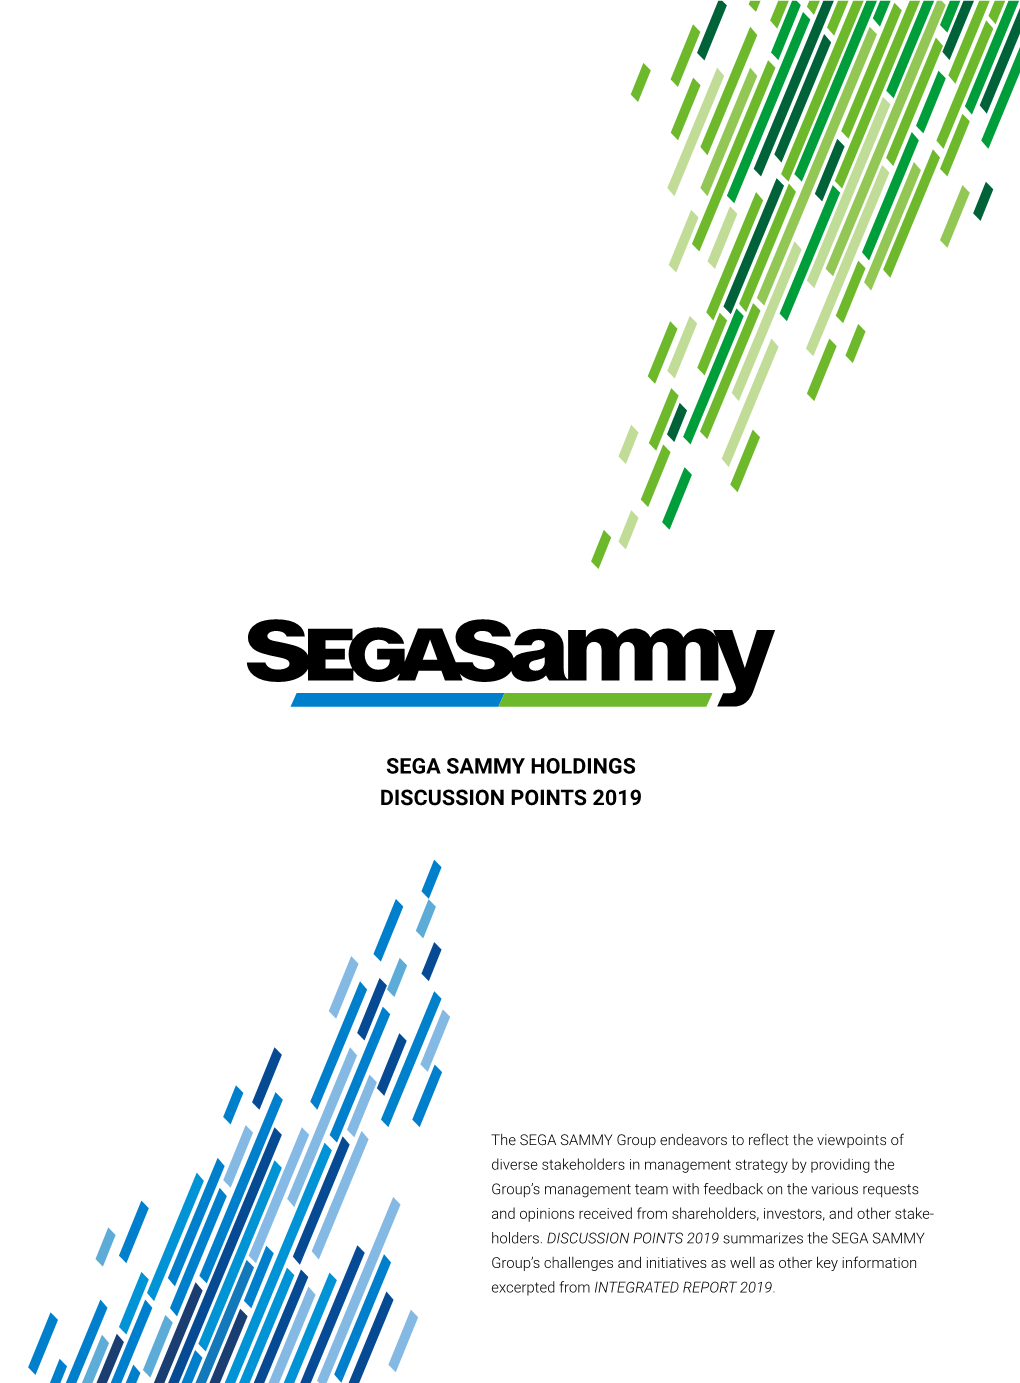 Sega Sammy Holdings Discussion Points 2019